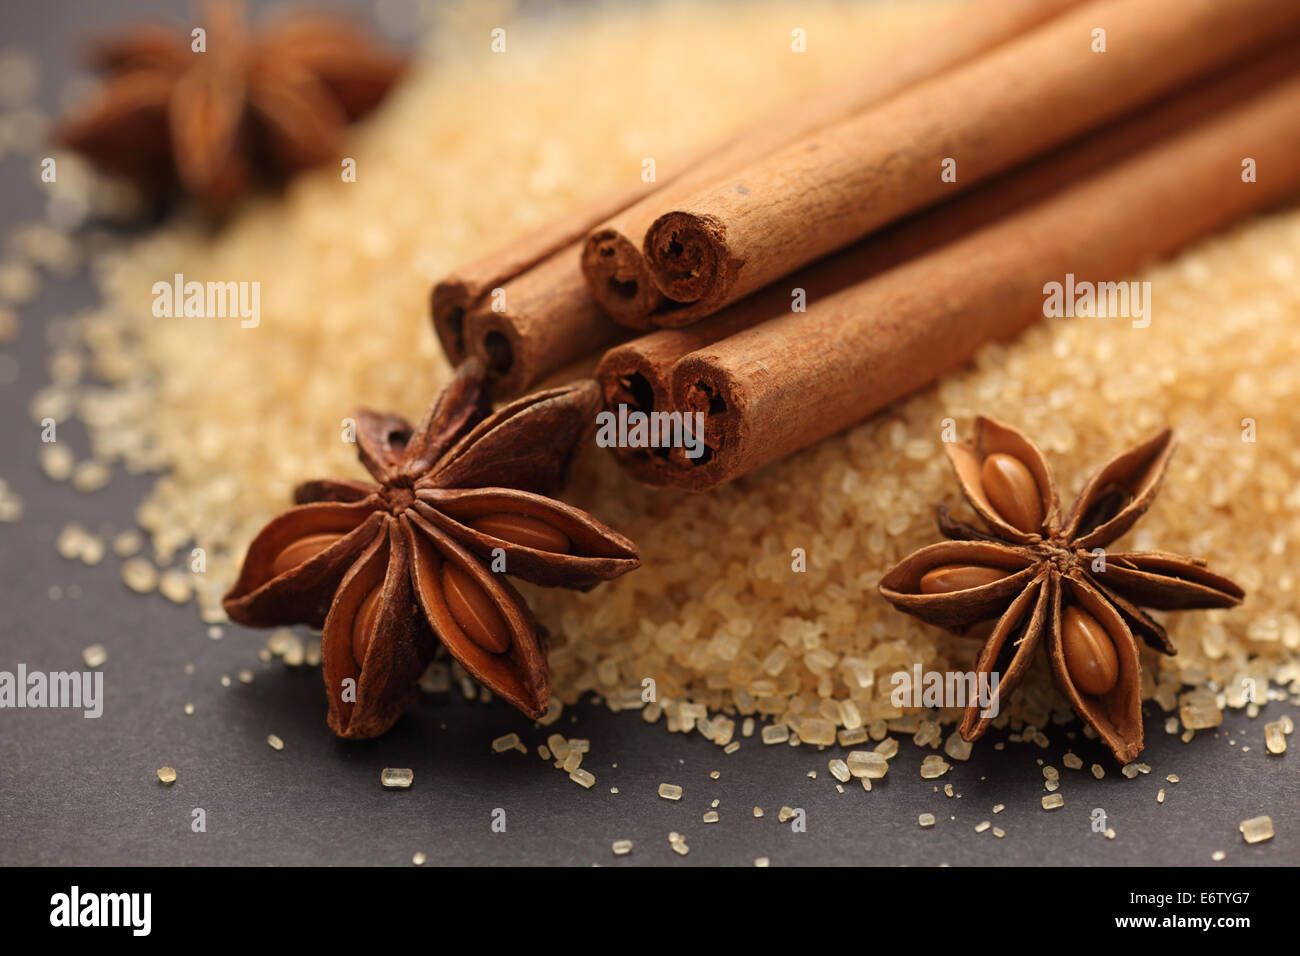 Spices. Cinnamon sticks, star anise and brown sugar. Black background. Closeup. Stock Photo